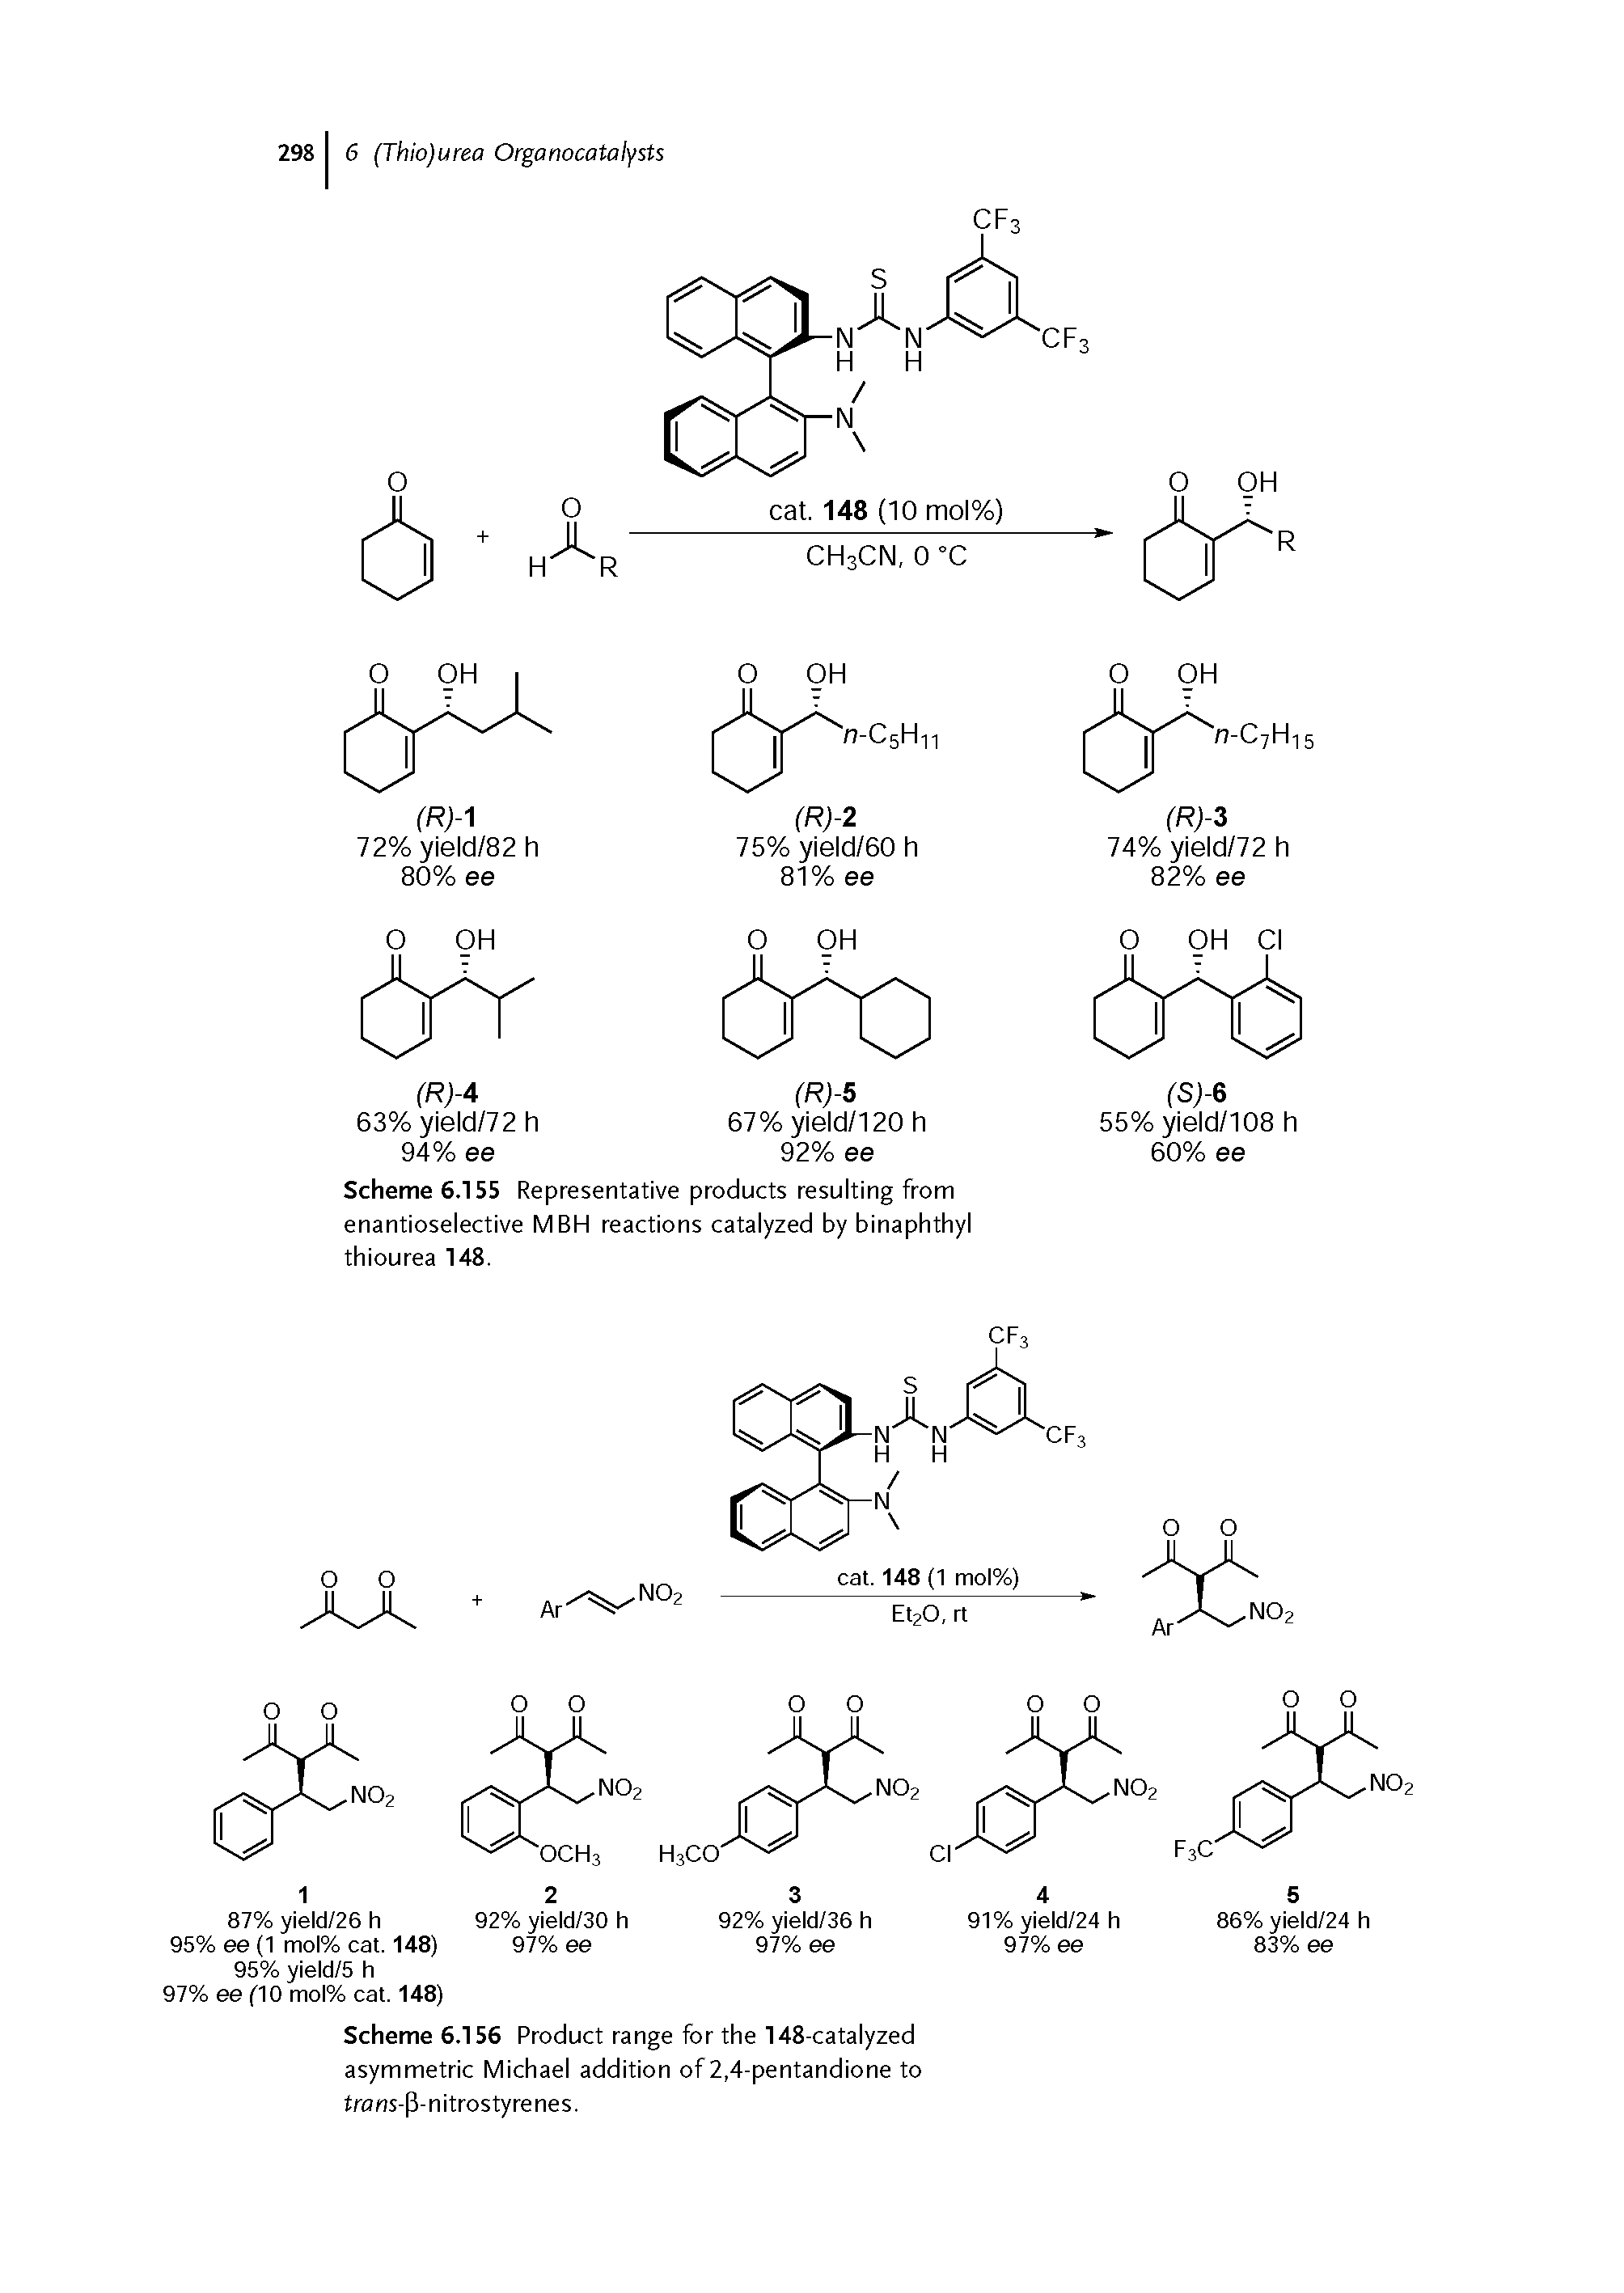 Scheme 6.155 Representative products resulting from enantioselective MBH reactions catalyzed by binaphthyl thiourea 148.